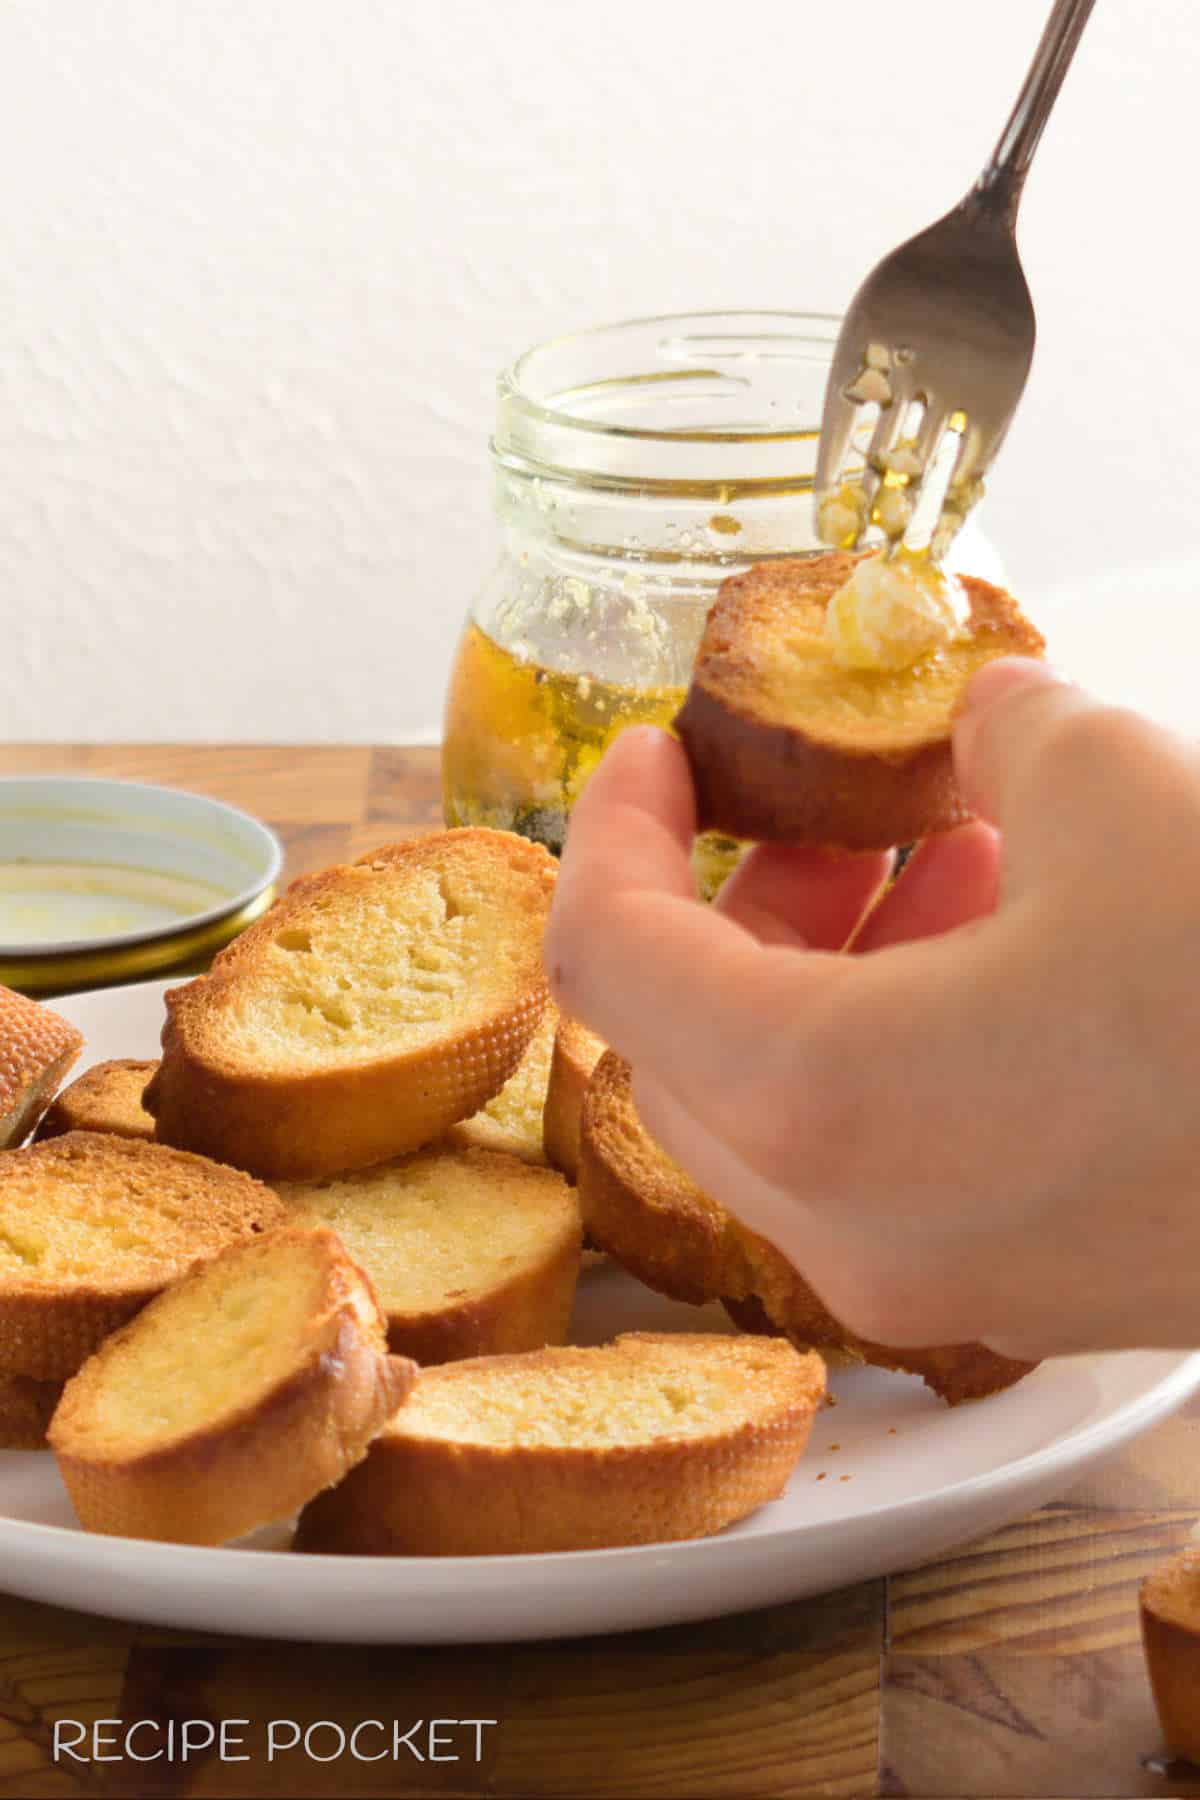 A hand holding a homemade crostini over a white plate with more corostini.